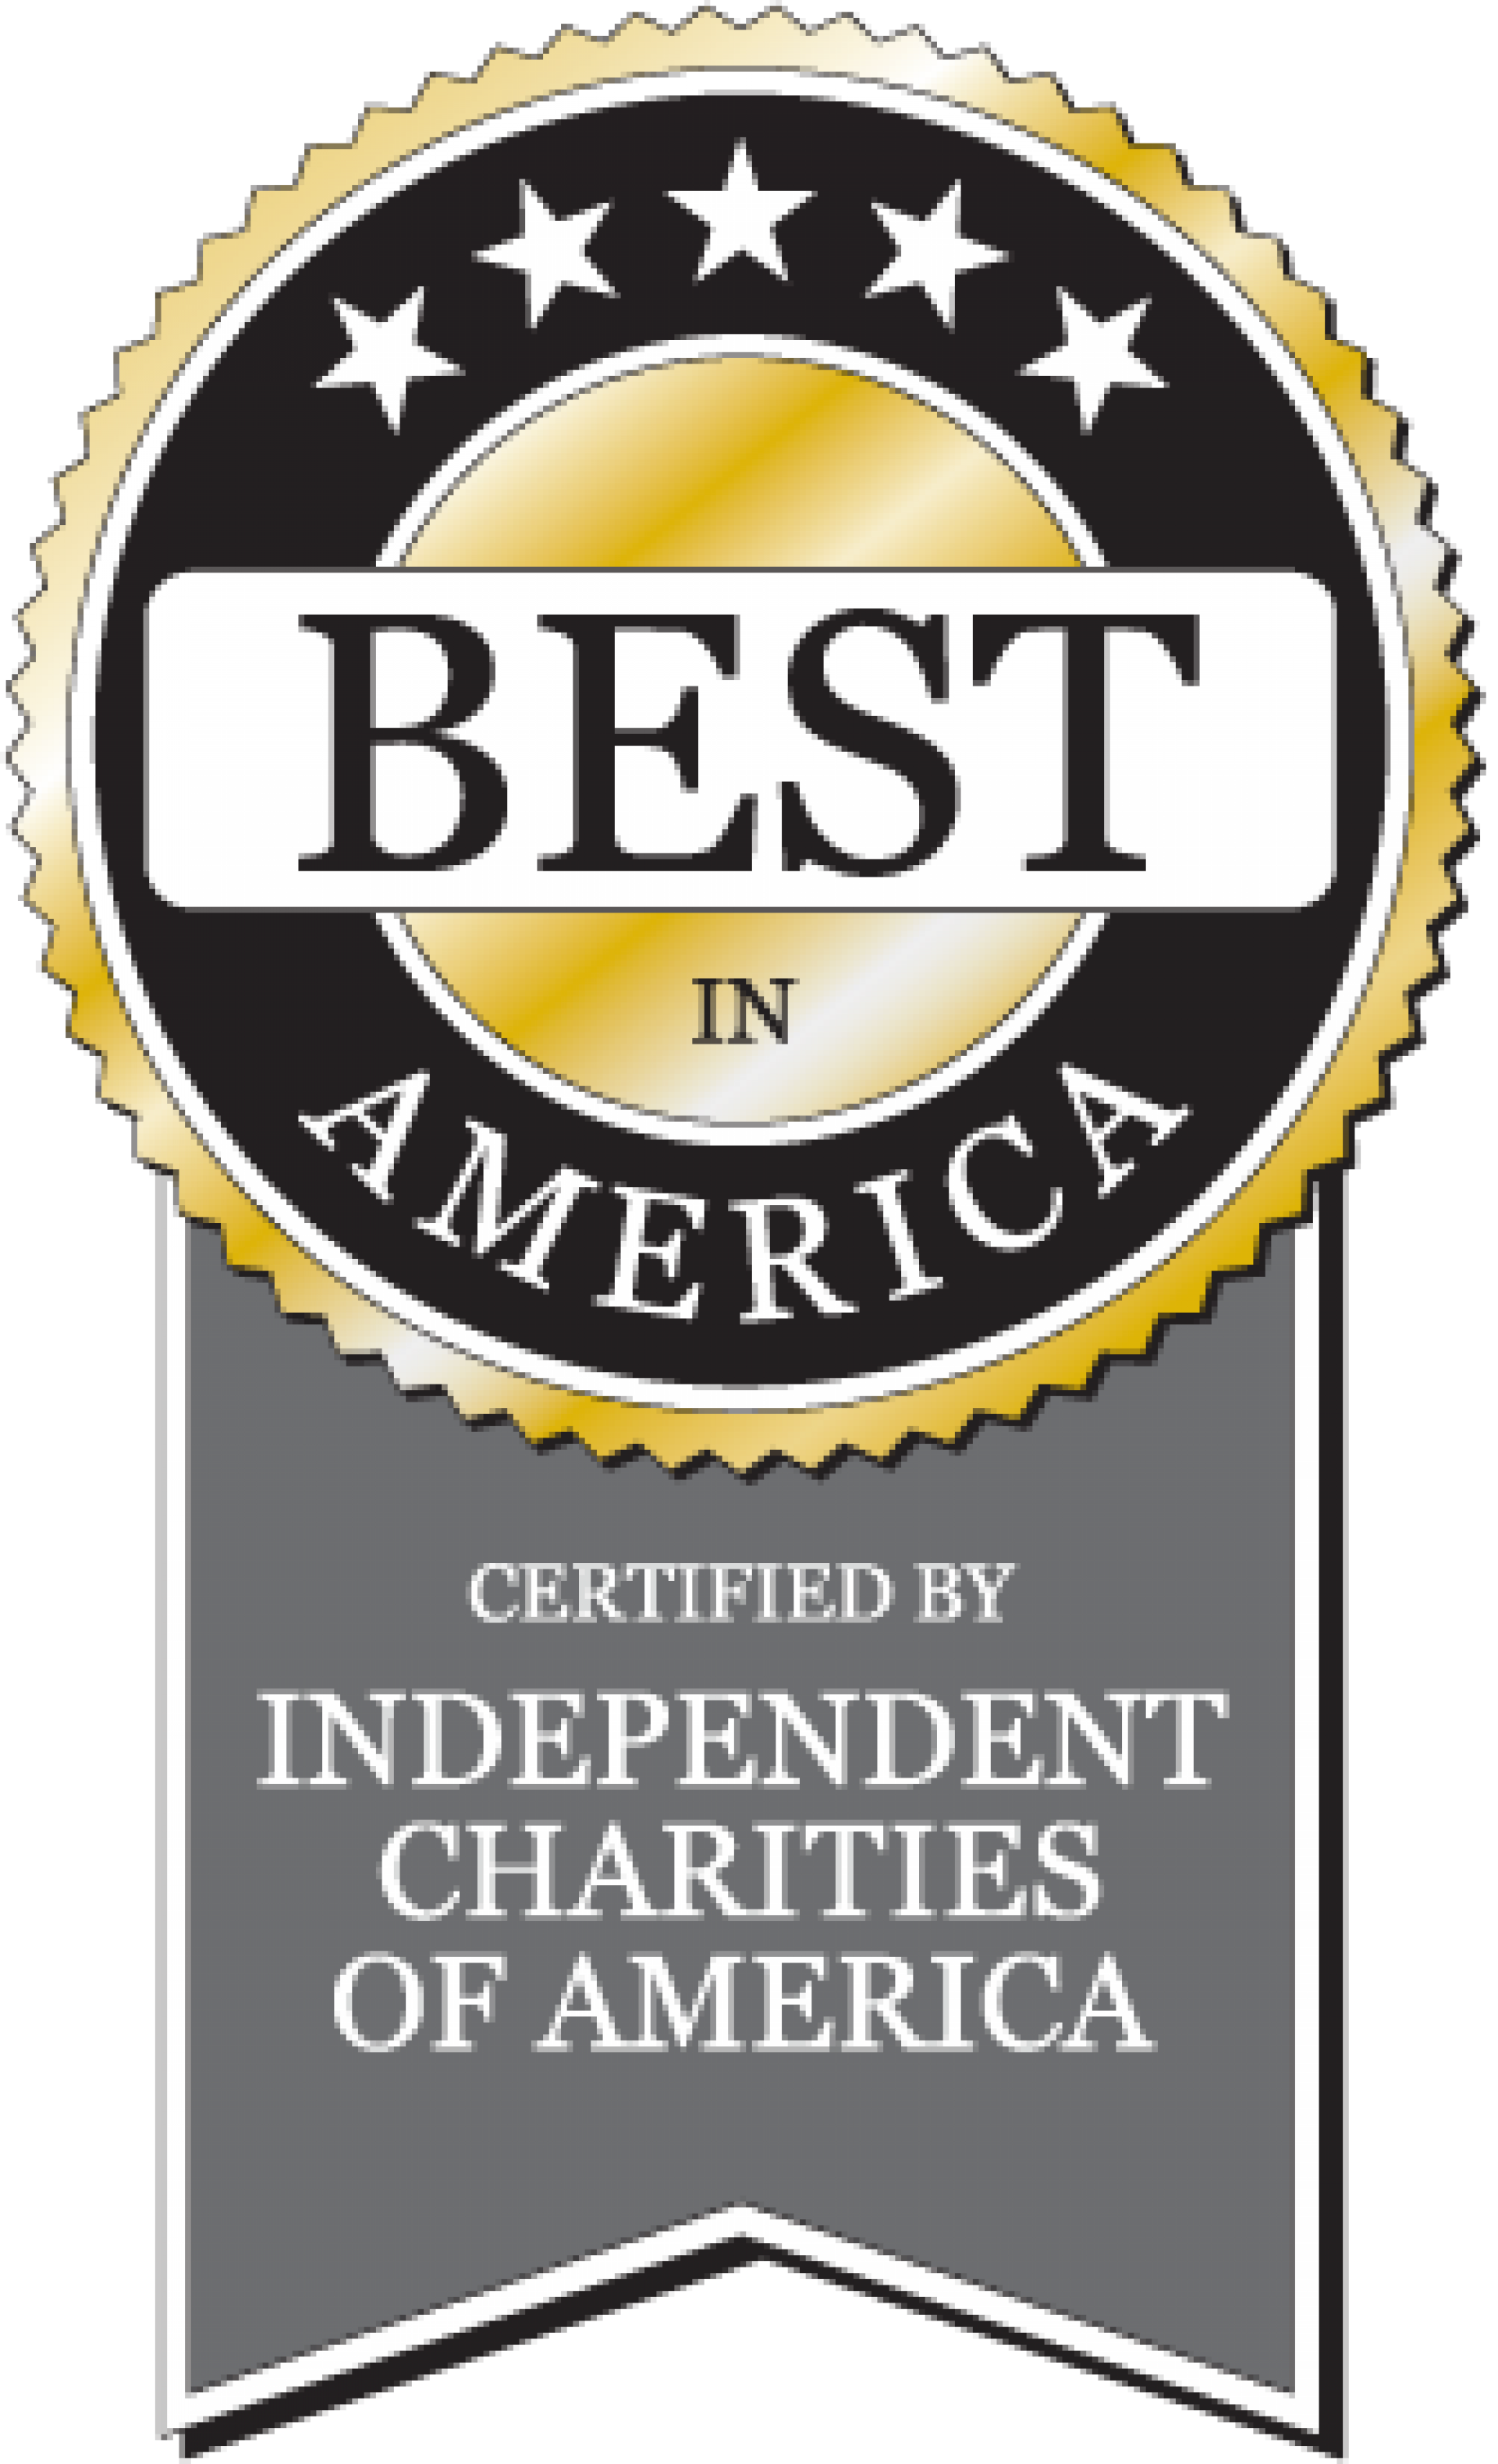 Best in America Certified by Independent Charities of America